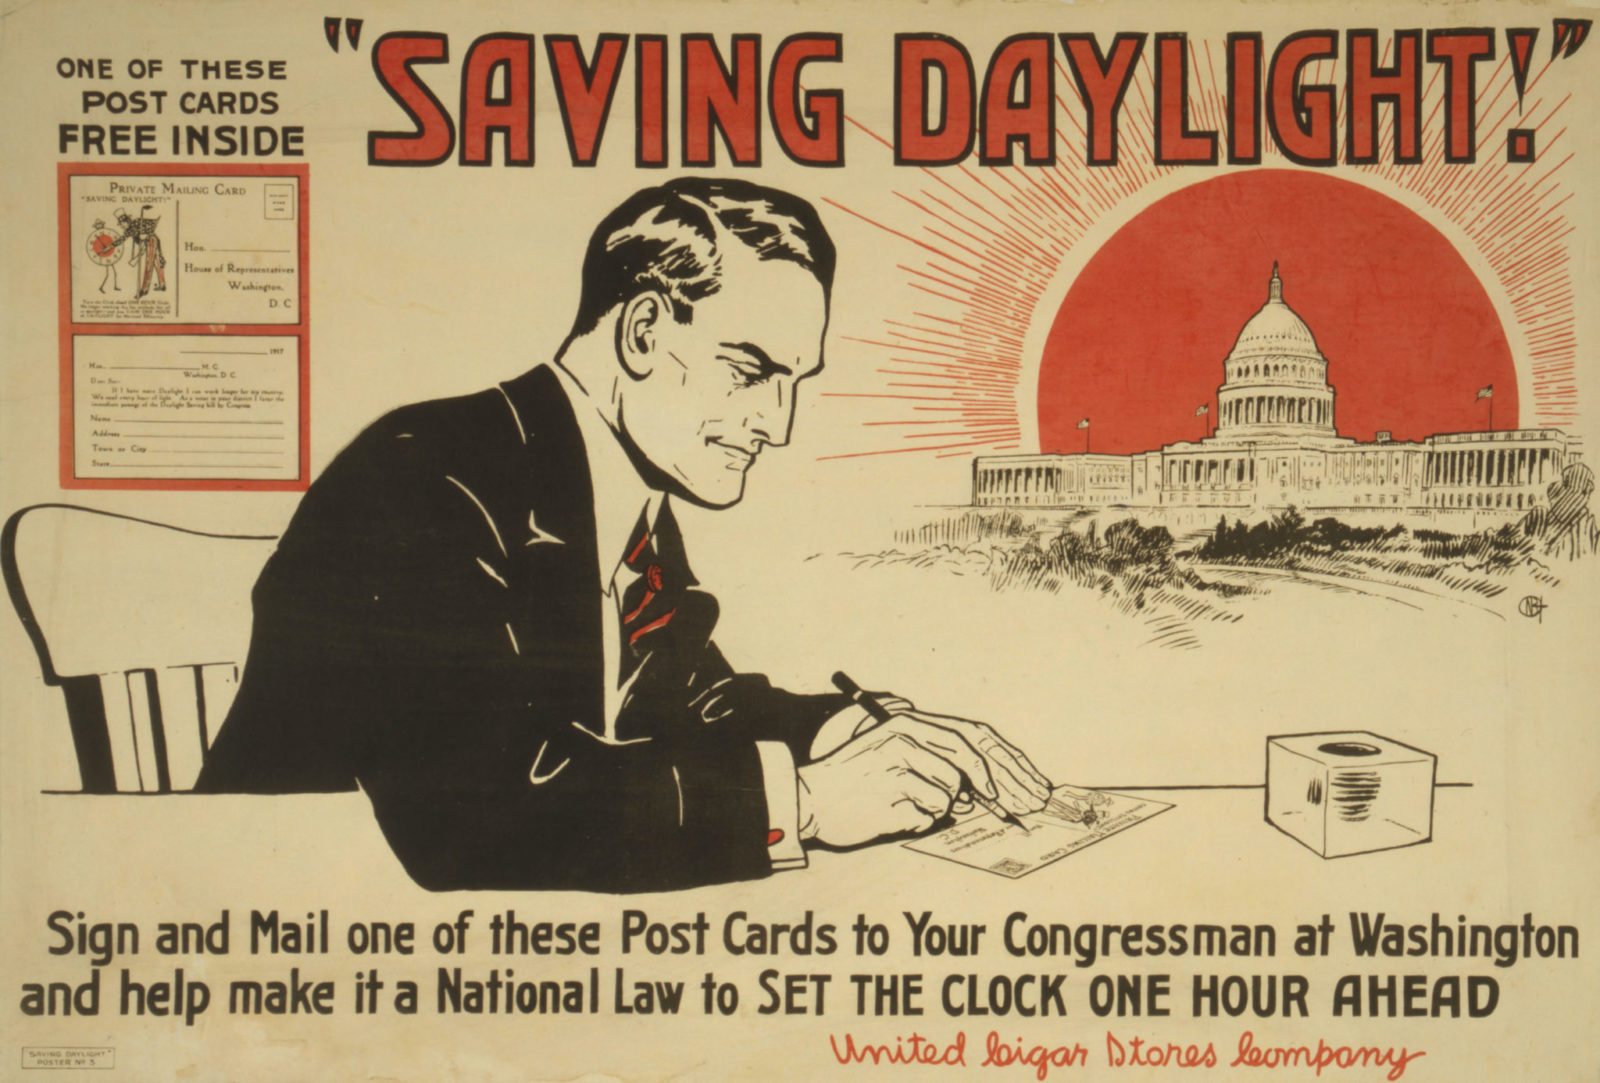 The adverse health effects of the lunacy that is Daylight Saving Time